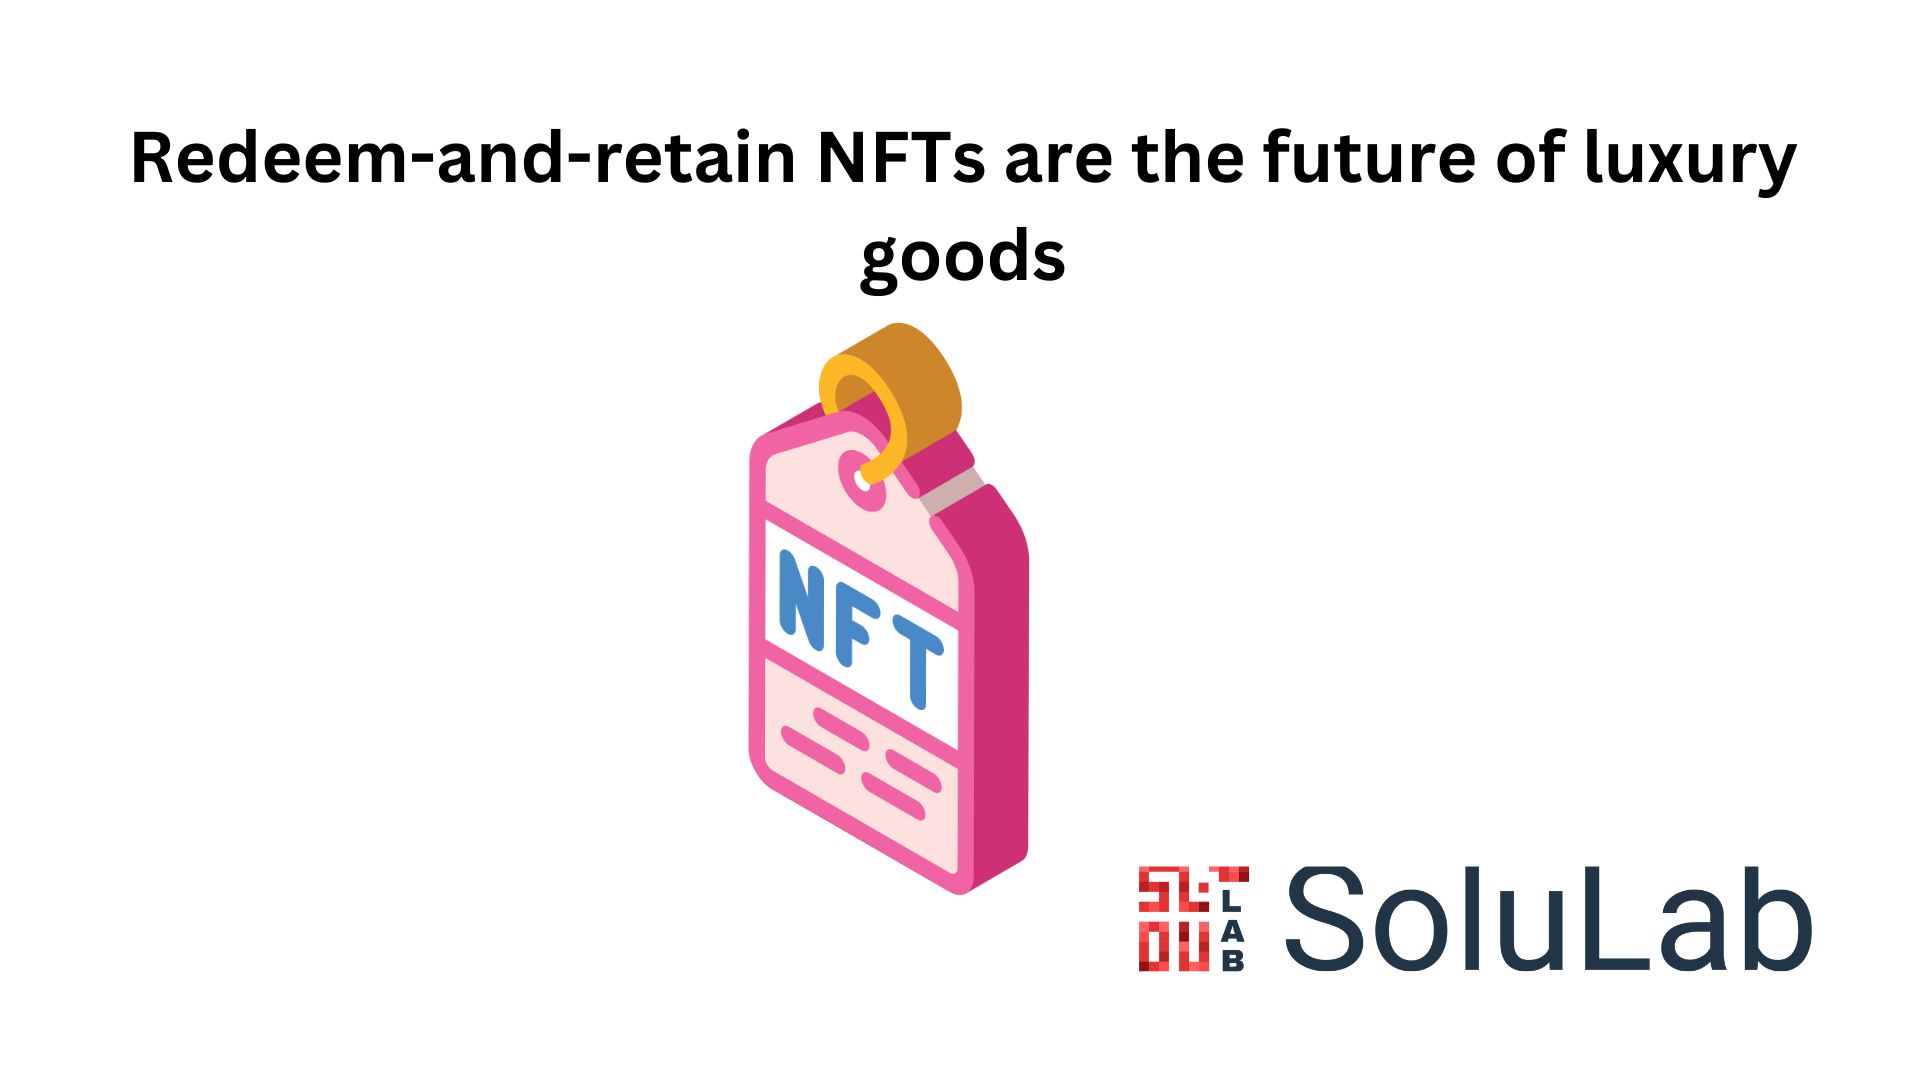 Redeem-and-retain NFTs are the future of luxury goods